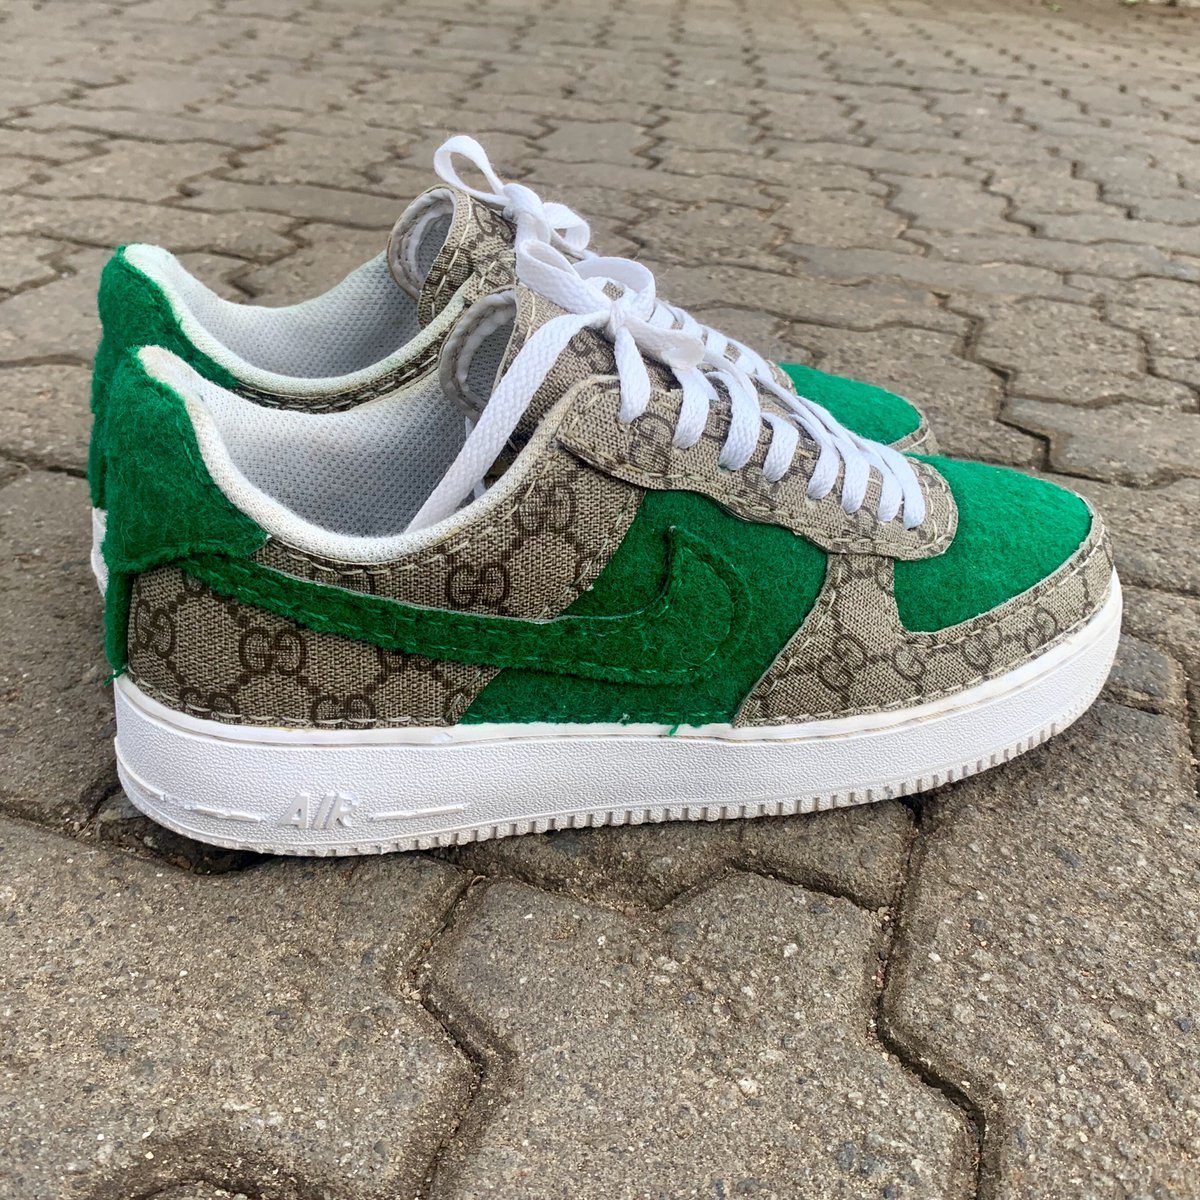 CareAboutNone [CAN] custom design. “GUCCI SLiMe” Airforce1 custom. Handcrafted by @careaboutnone F1:Before F2: WIP F3’4:After